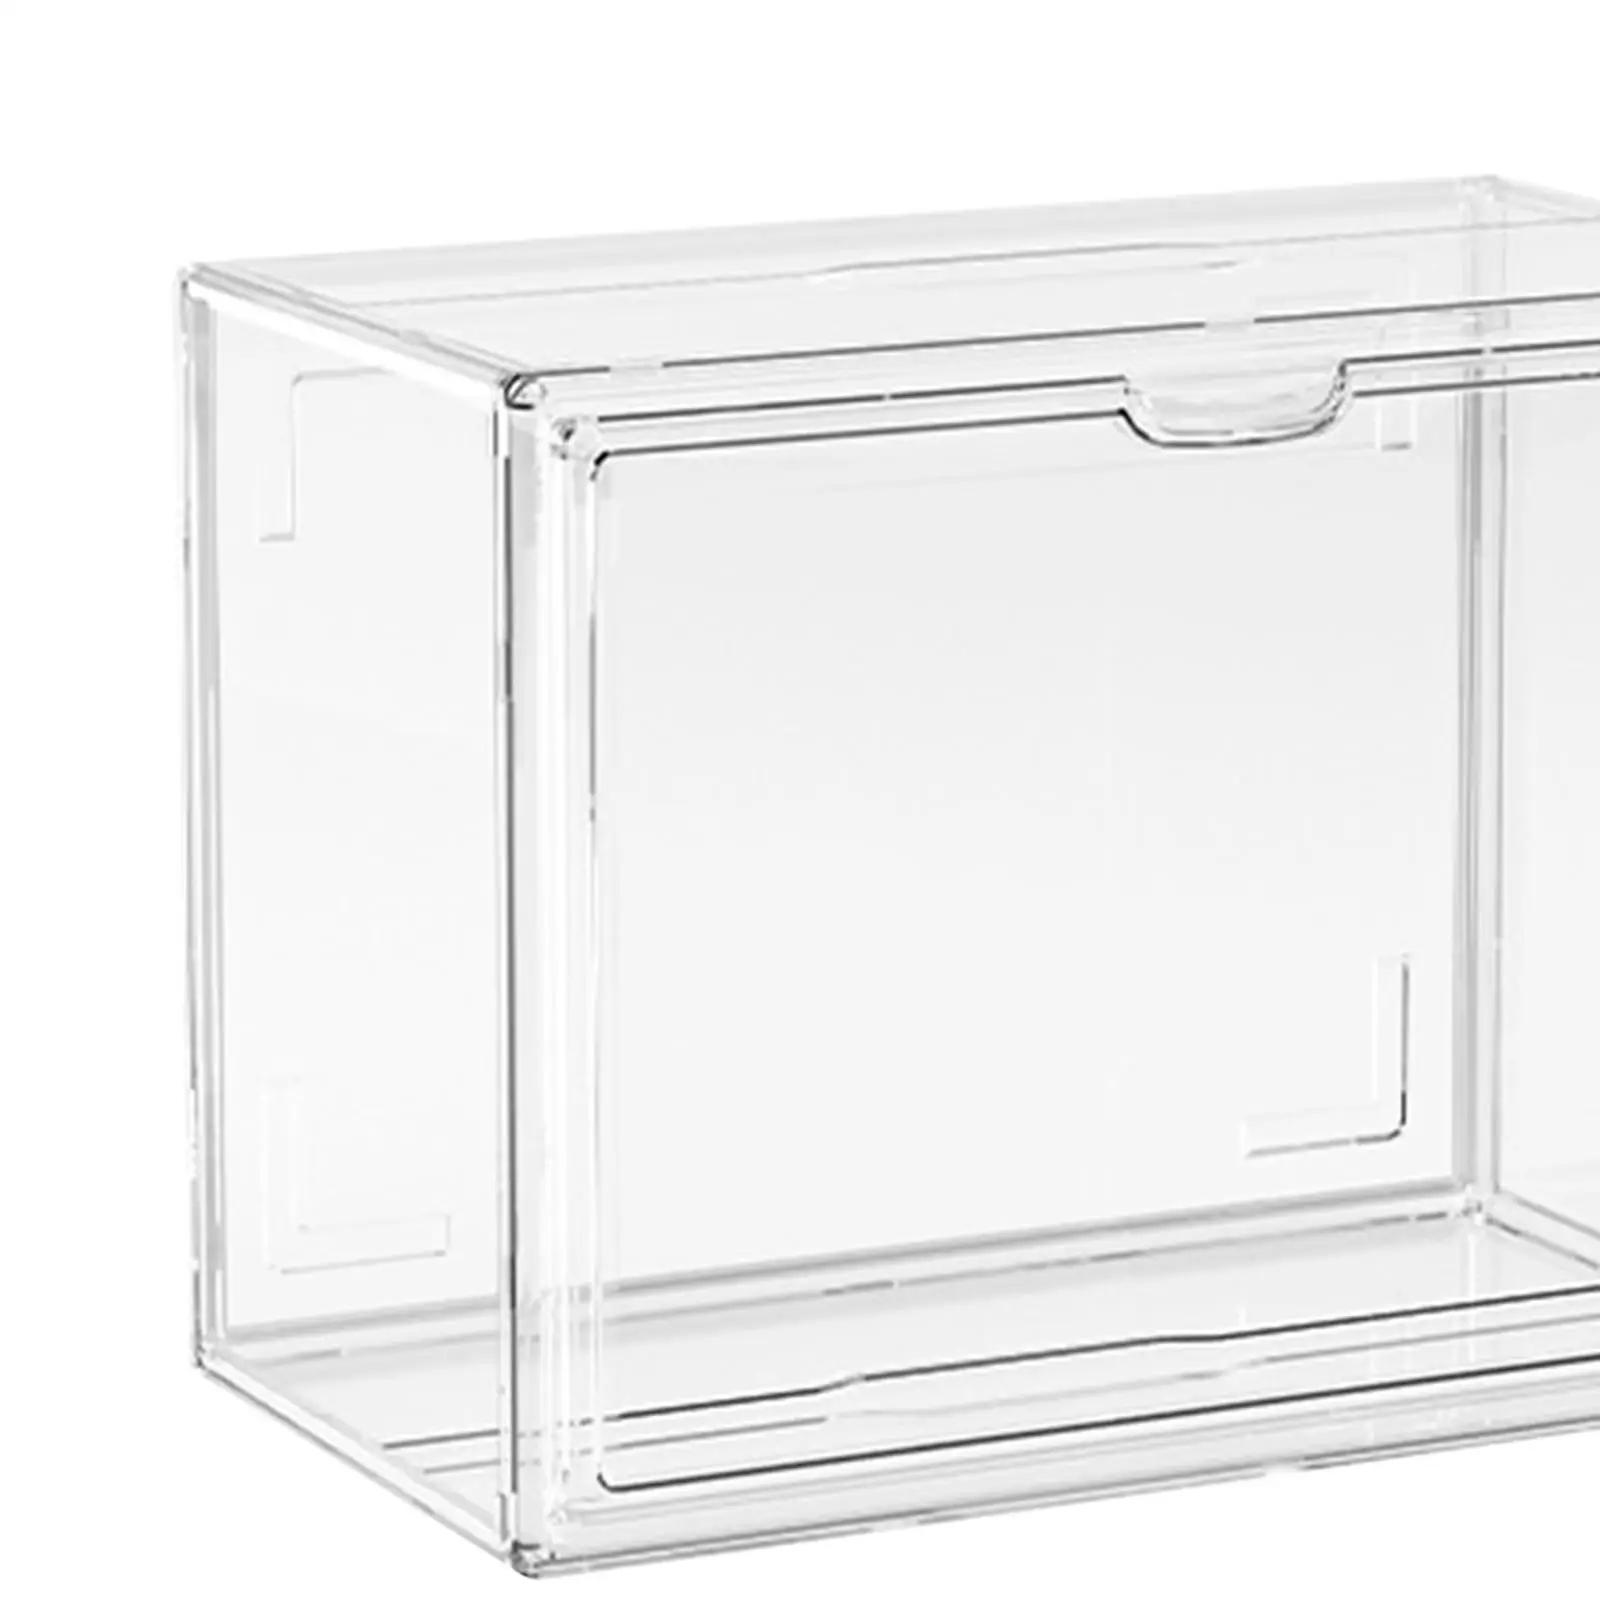 Display Case Dustproof Collectibles Display Showcase Display Box for Miniature Figurines